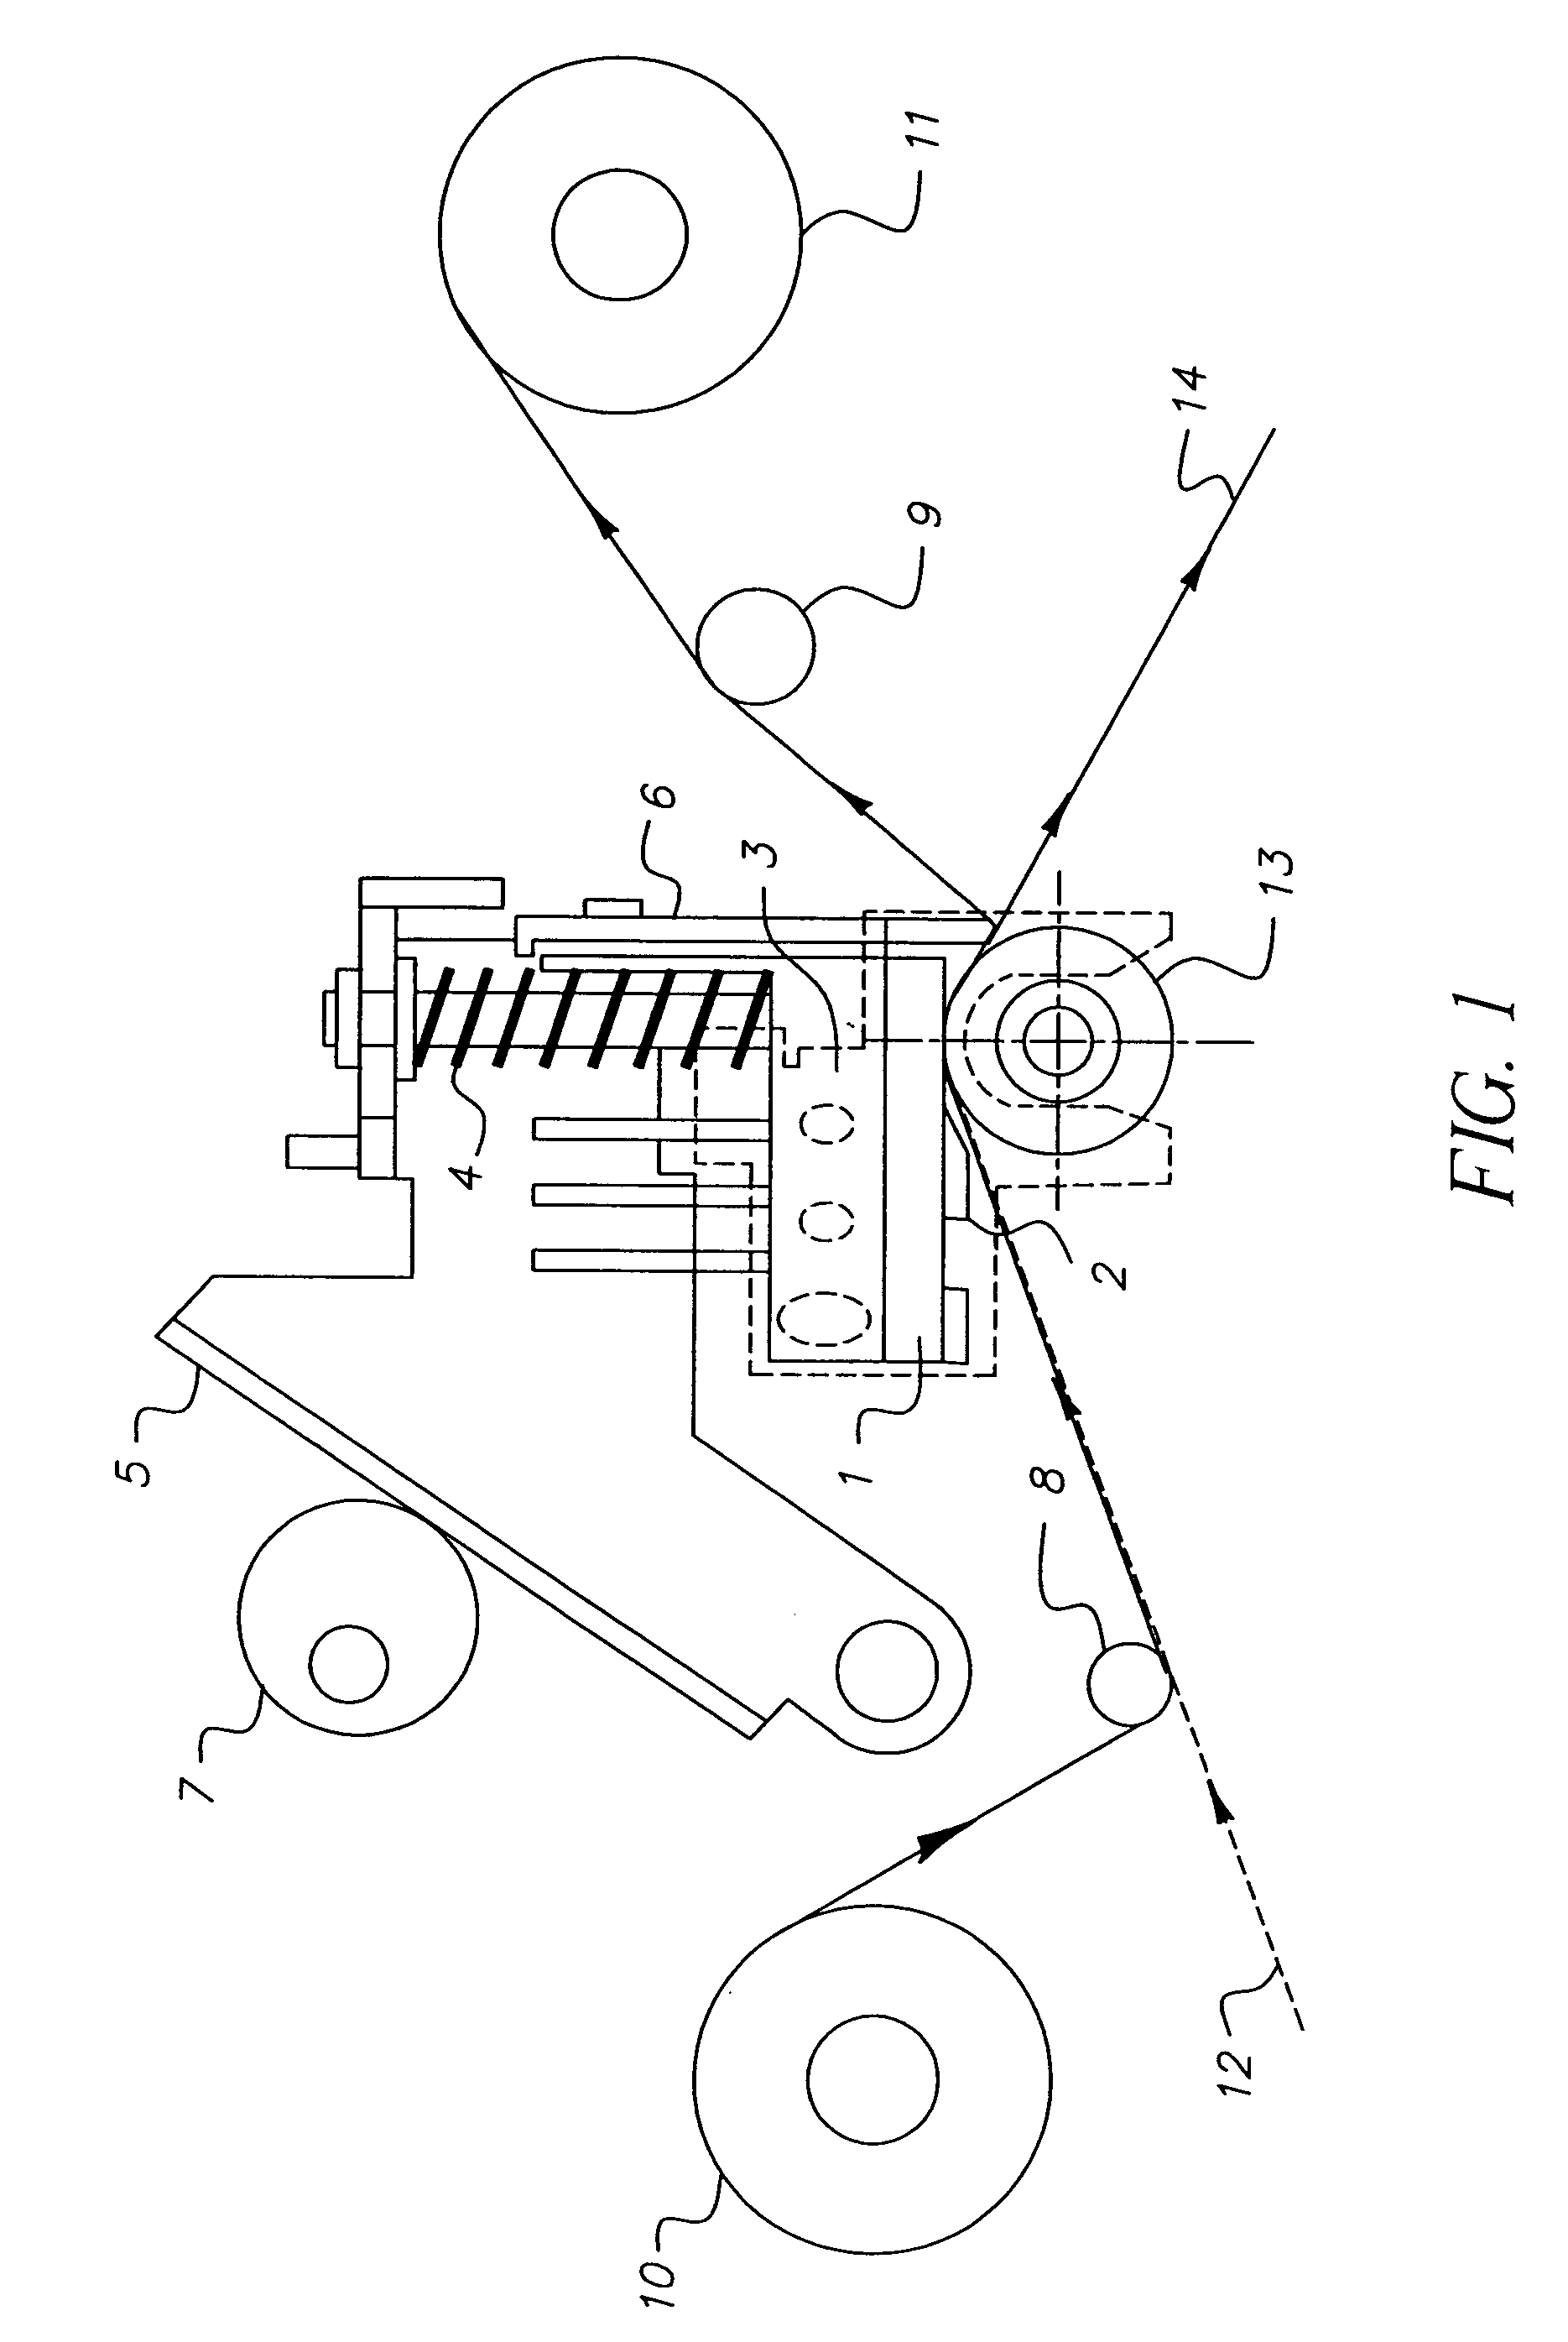 Method of transferring a protective overcoat to a dye-donor element